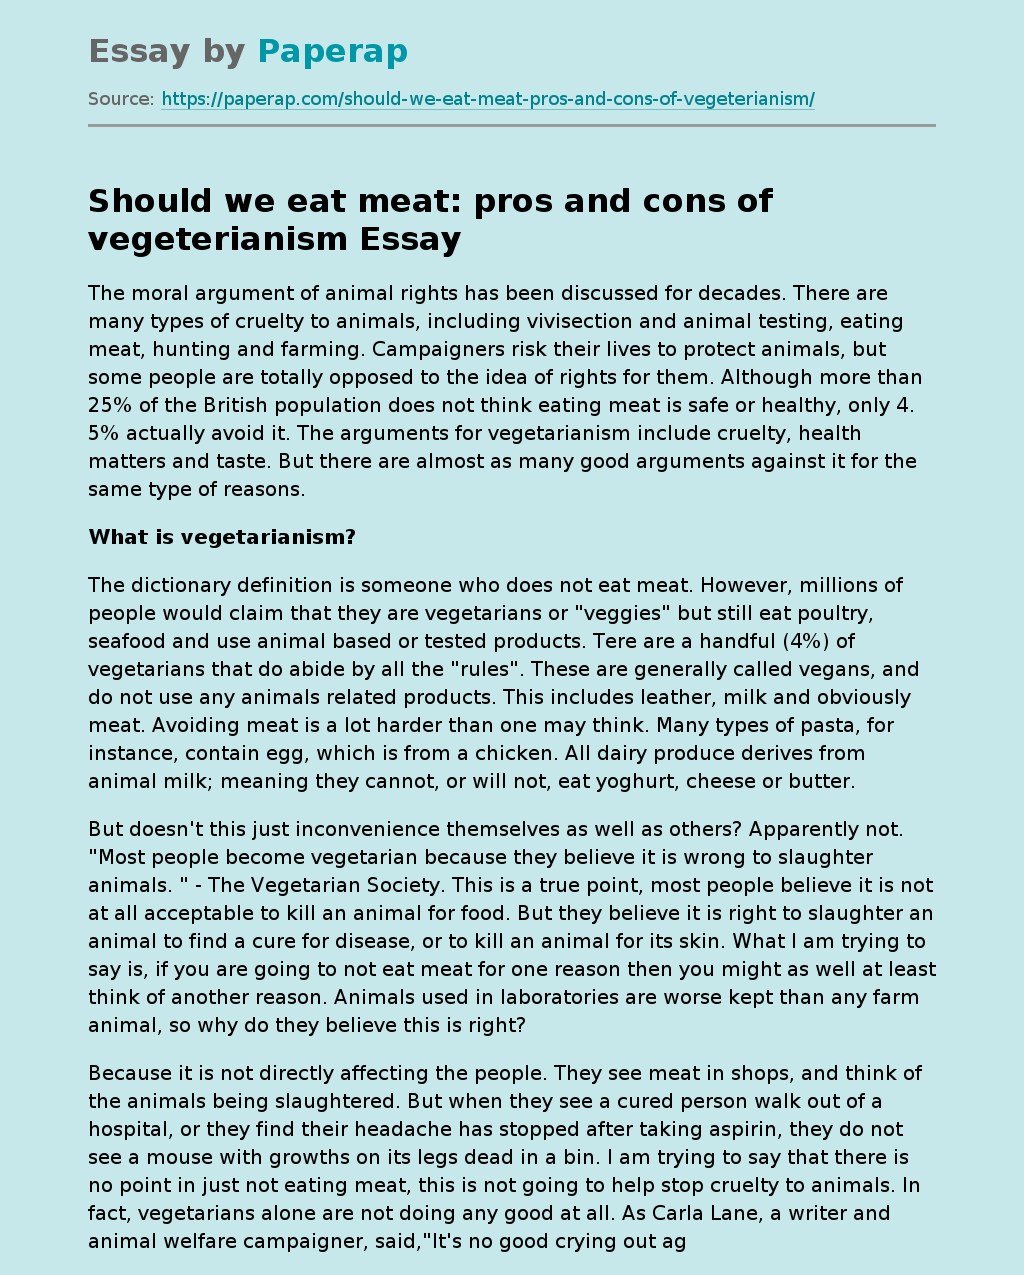 Should we eat meat: pros and cons of vegeterianism